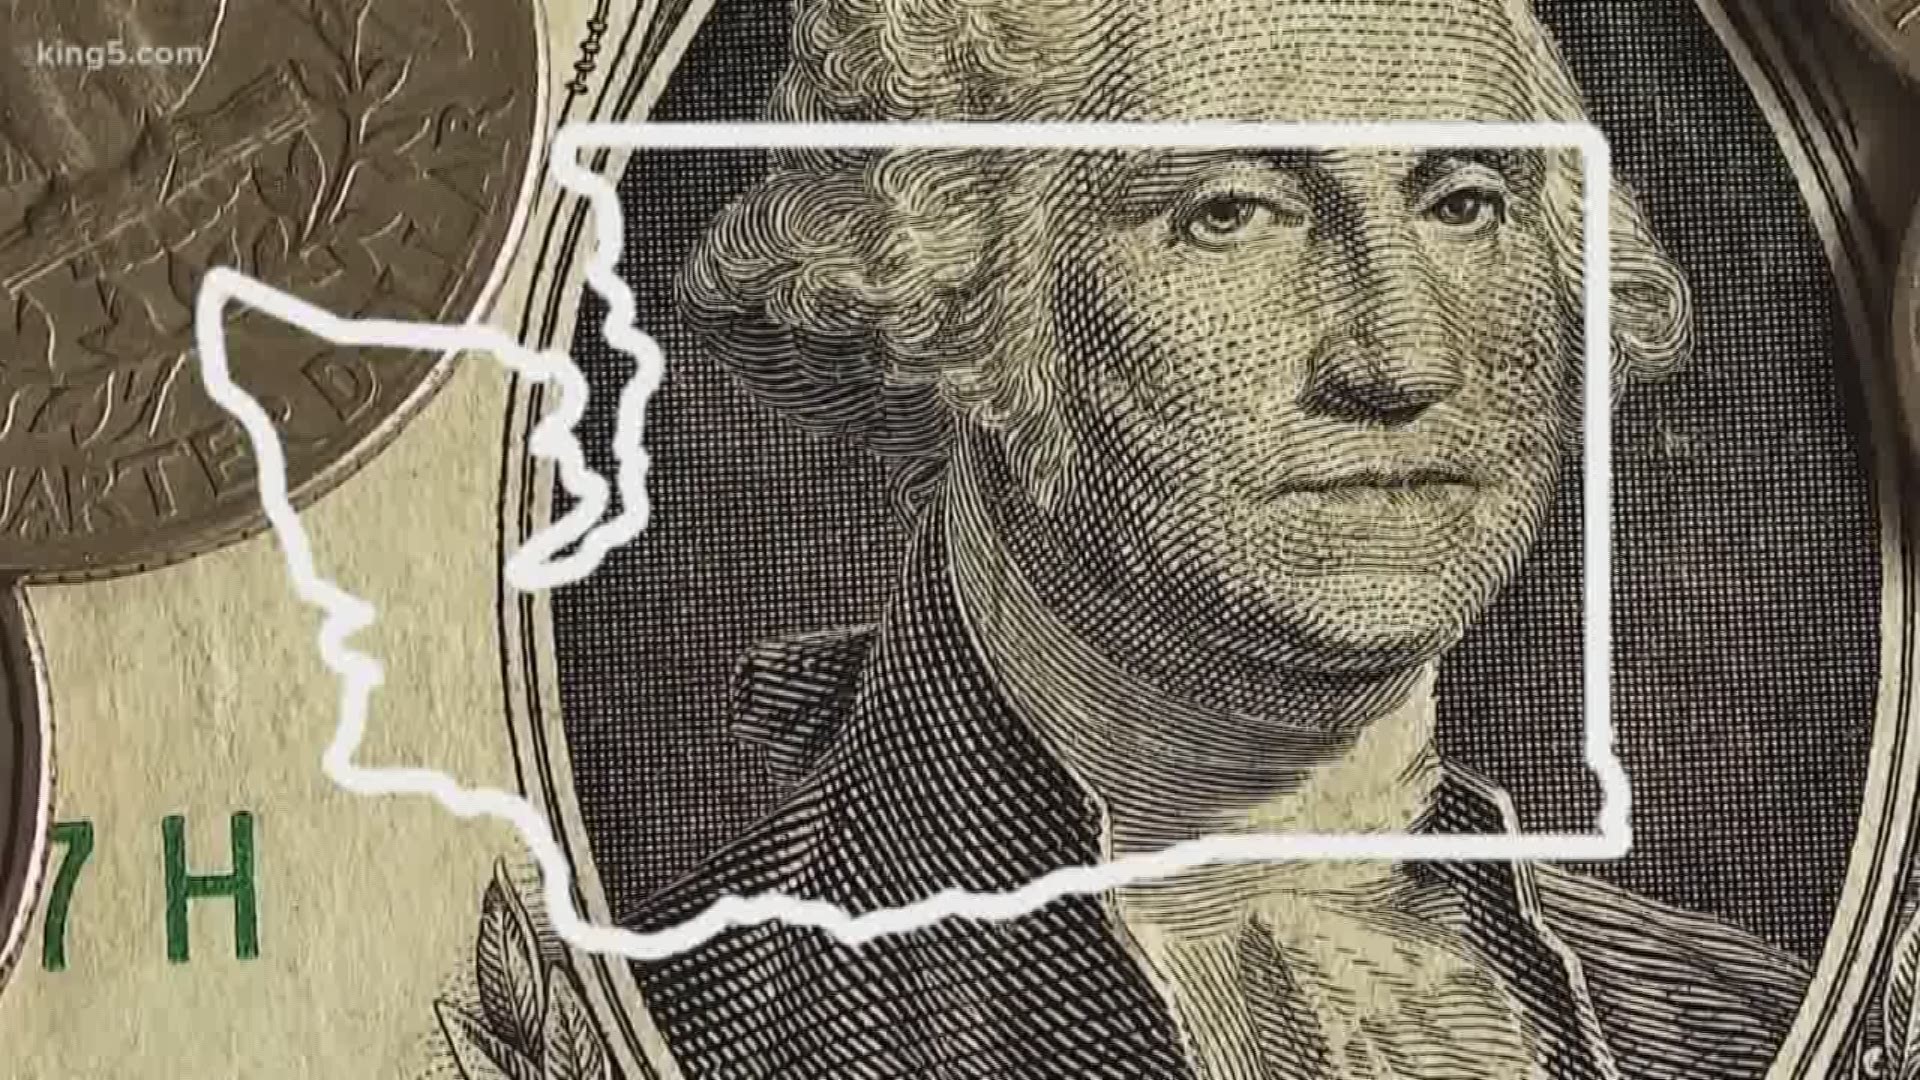 The Governor's budget proposal calls for 3.7 billion dollars in new taxes. And this at a time when many Washingtonians are already feeling like they are being taxed too much. But is that true? KING 5's Angela Poe Russell takes a closer look.